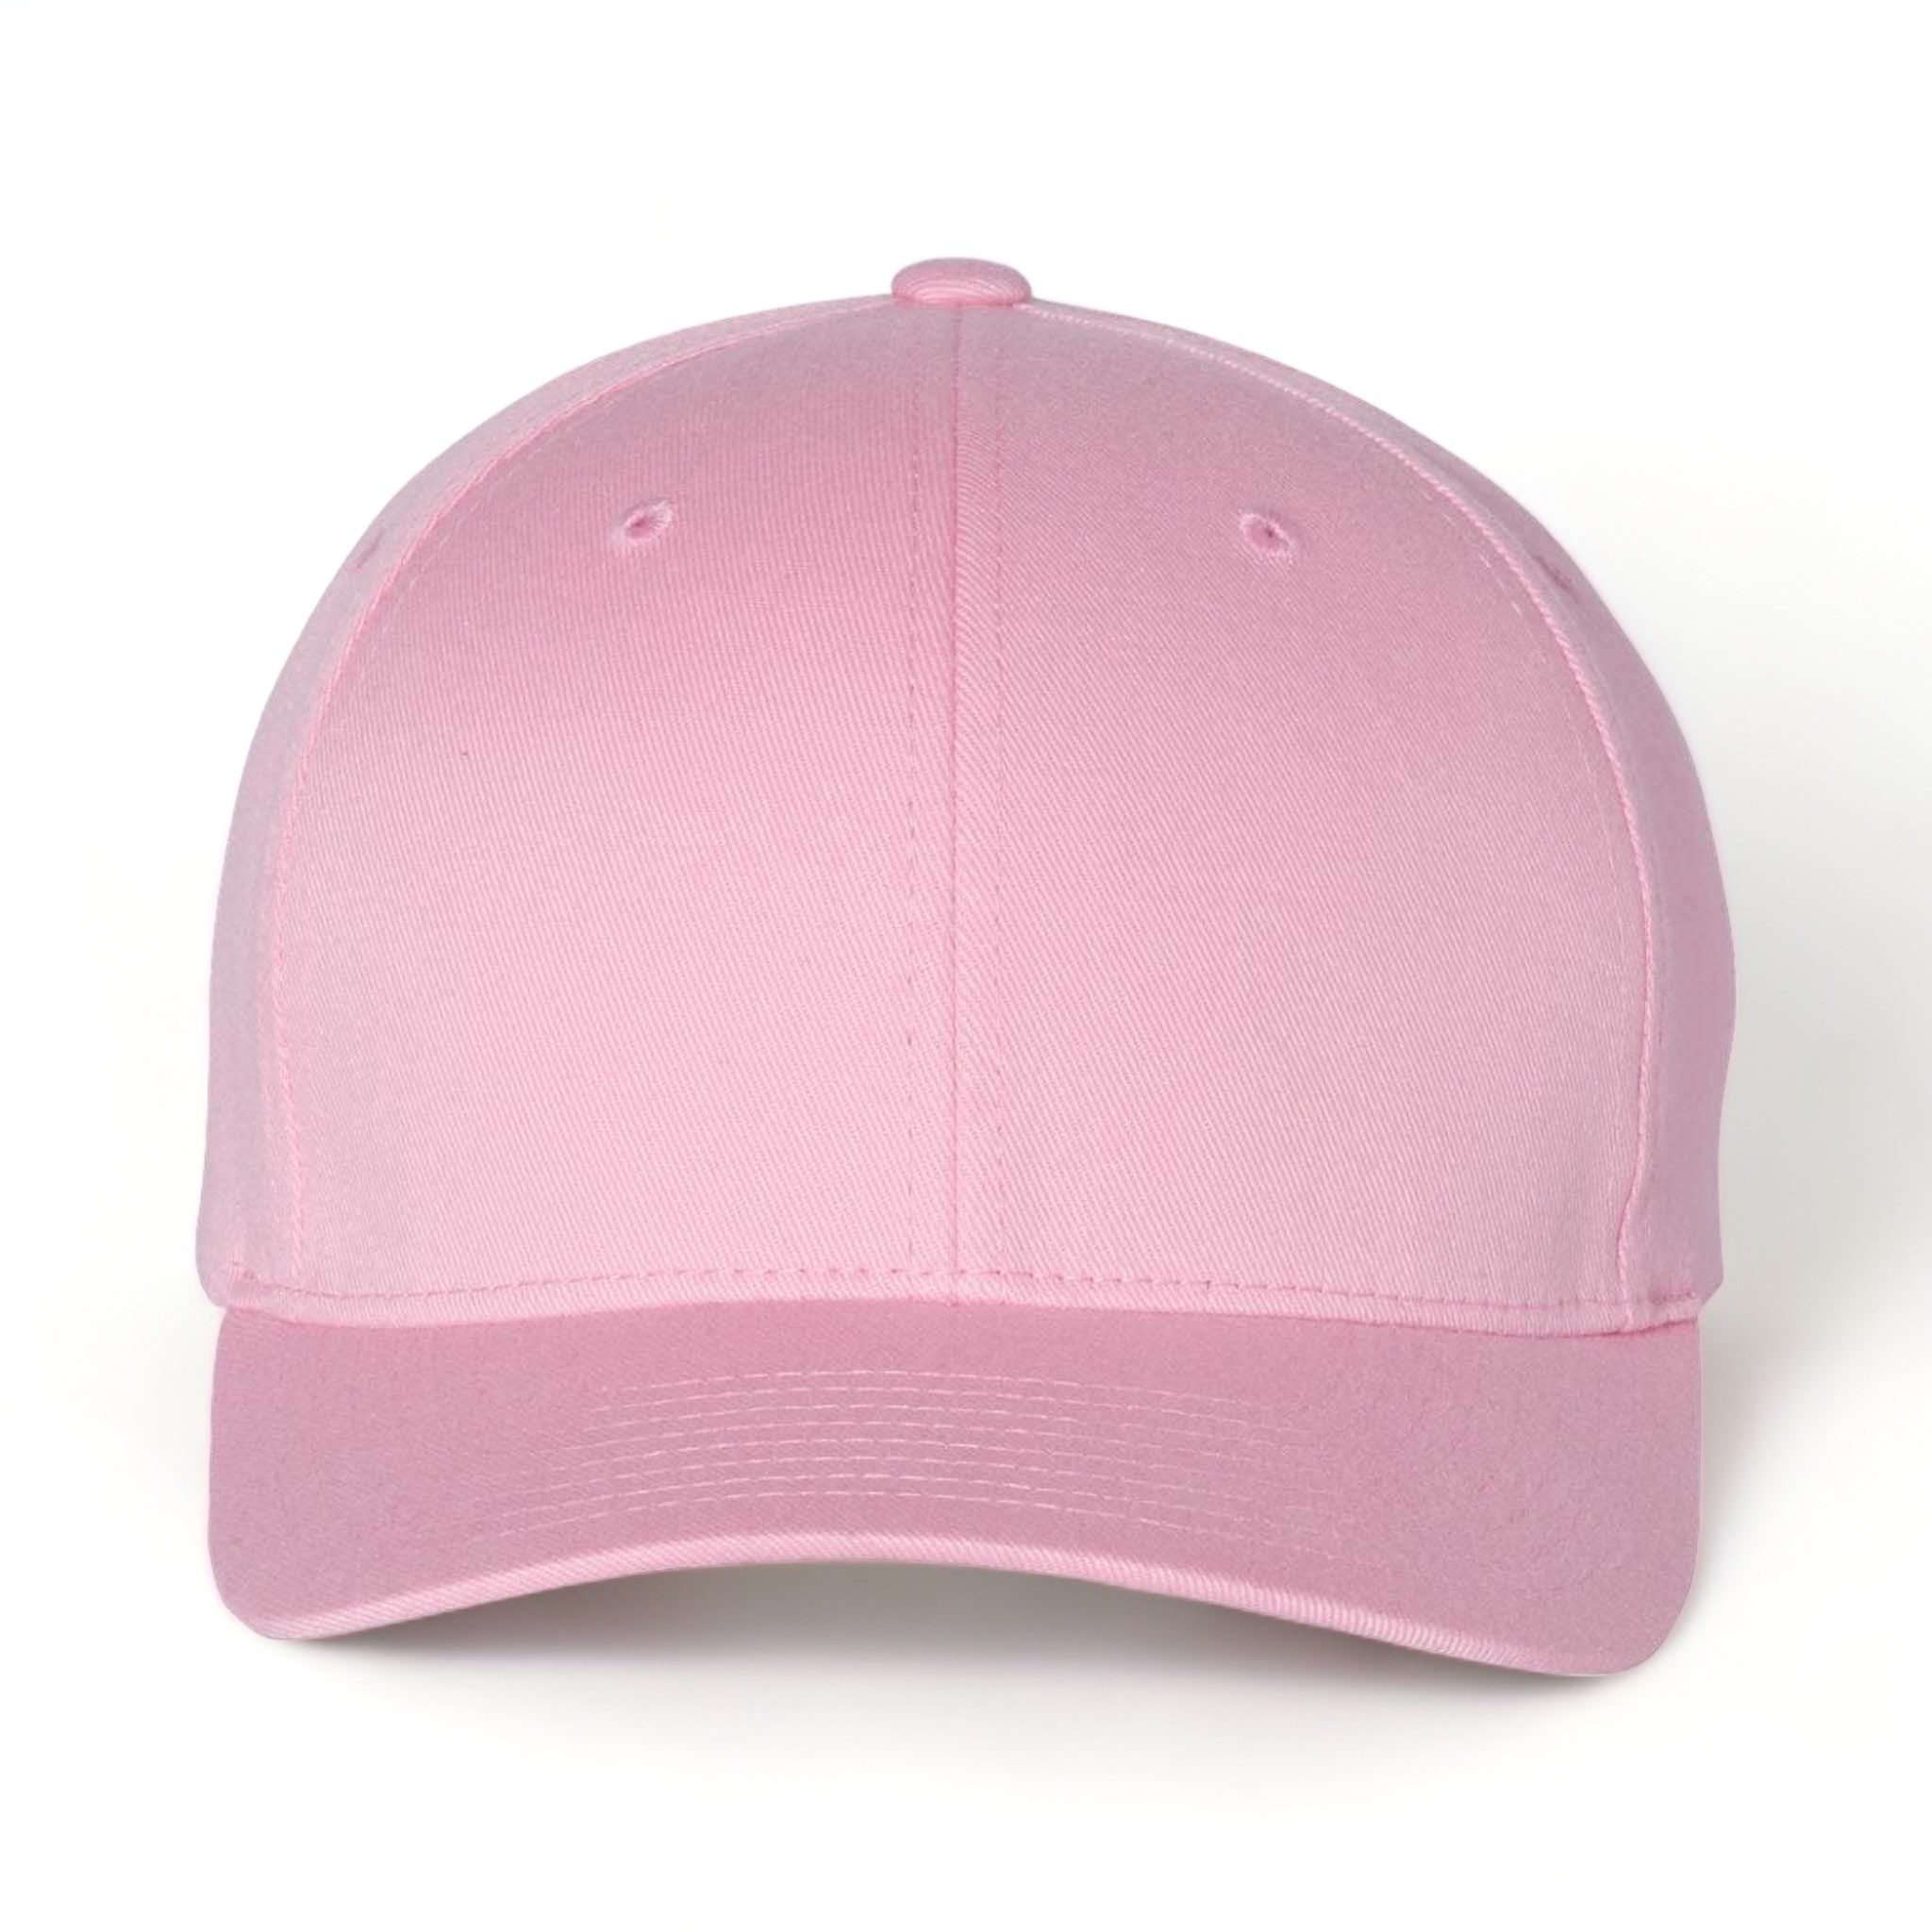 Front view of Flexfit 6277 custom hat in pink